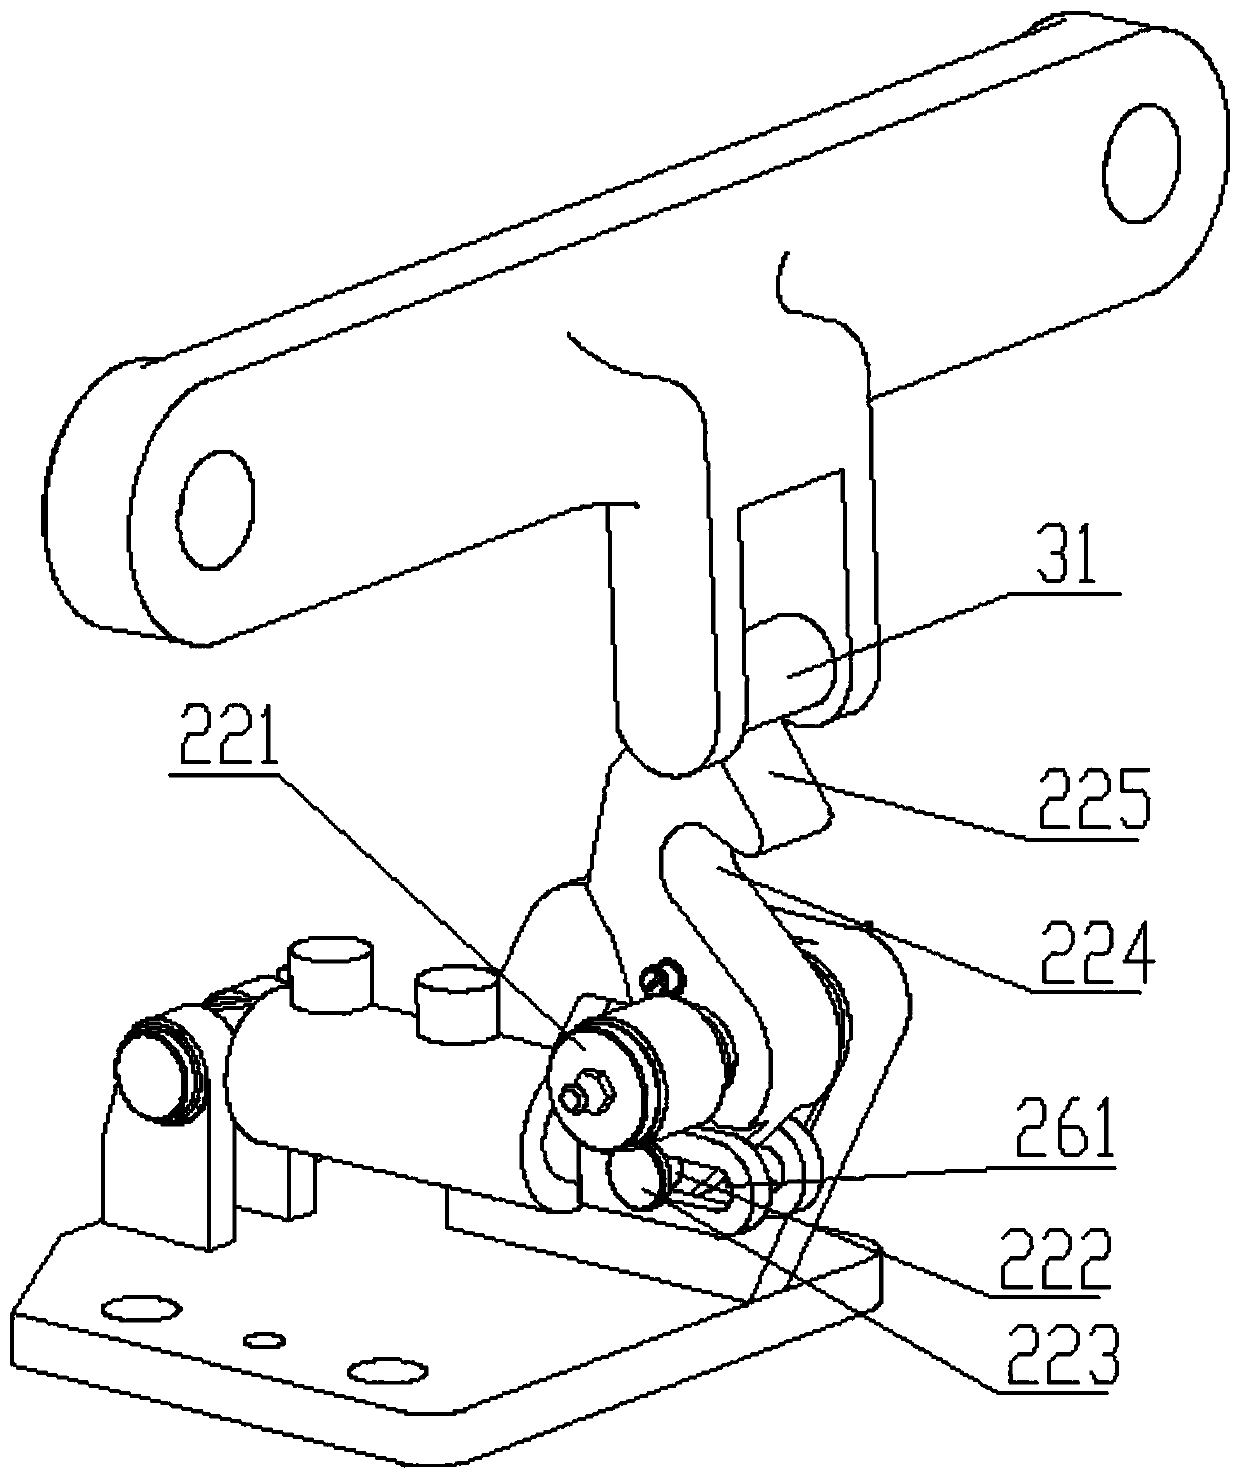 A locking release device